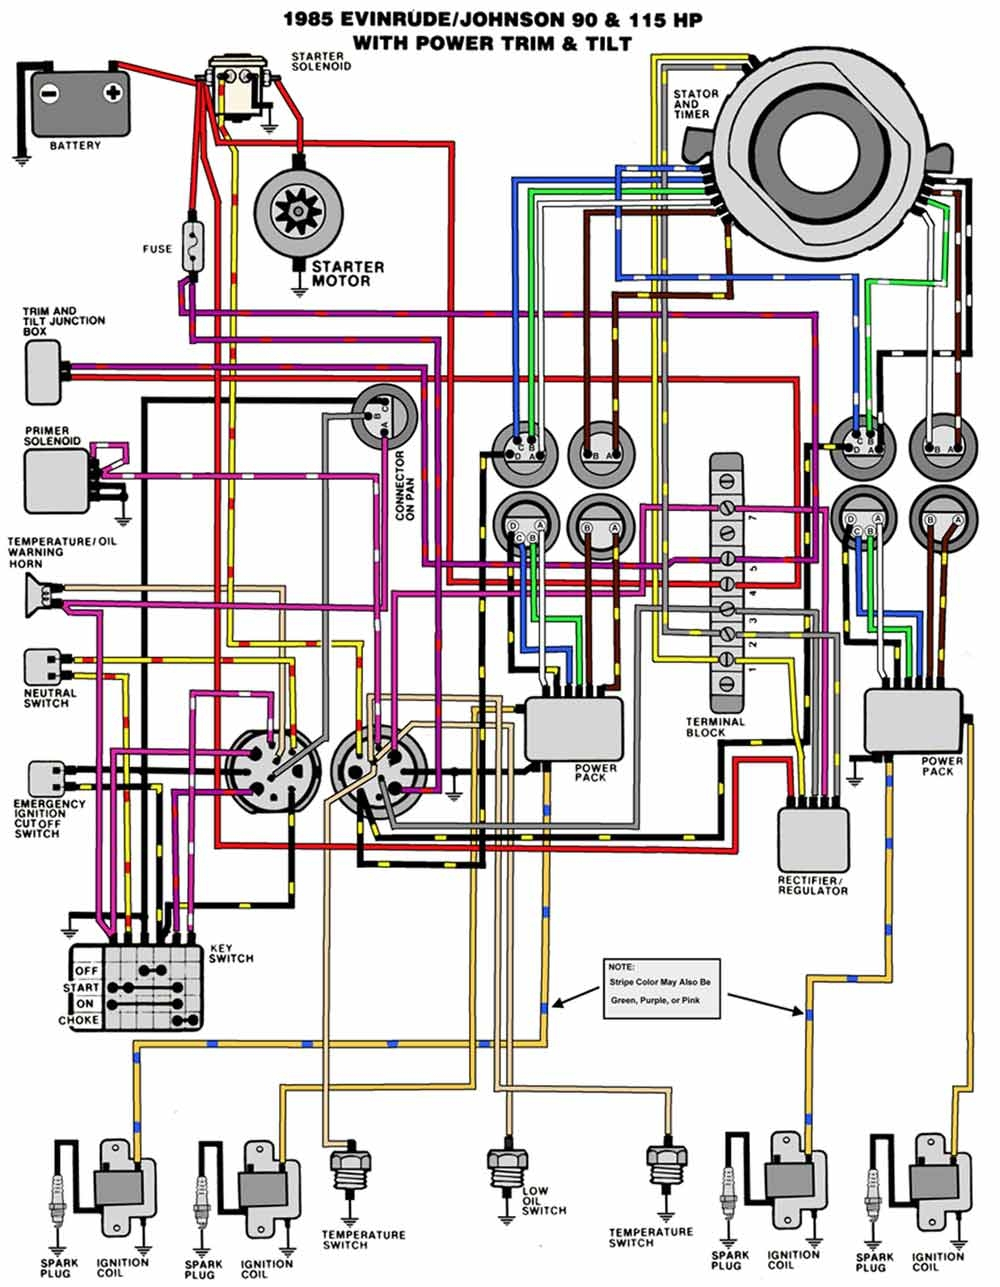 Wiring Diagram Also Johnson Outboard Ignition Switch Wiring Diagram - Johnson Outboard Ignition Switch Wiring Diagram